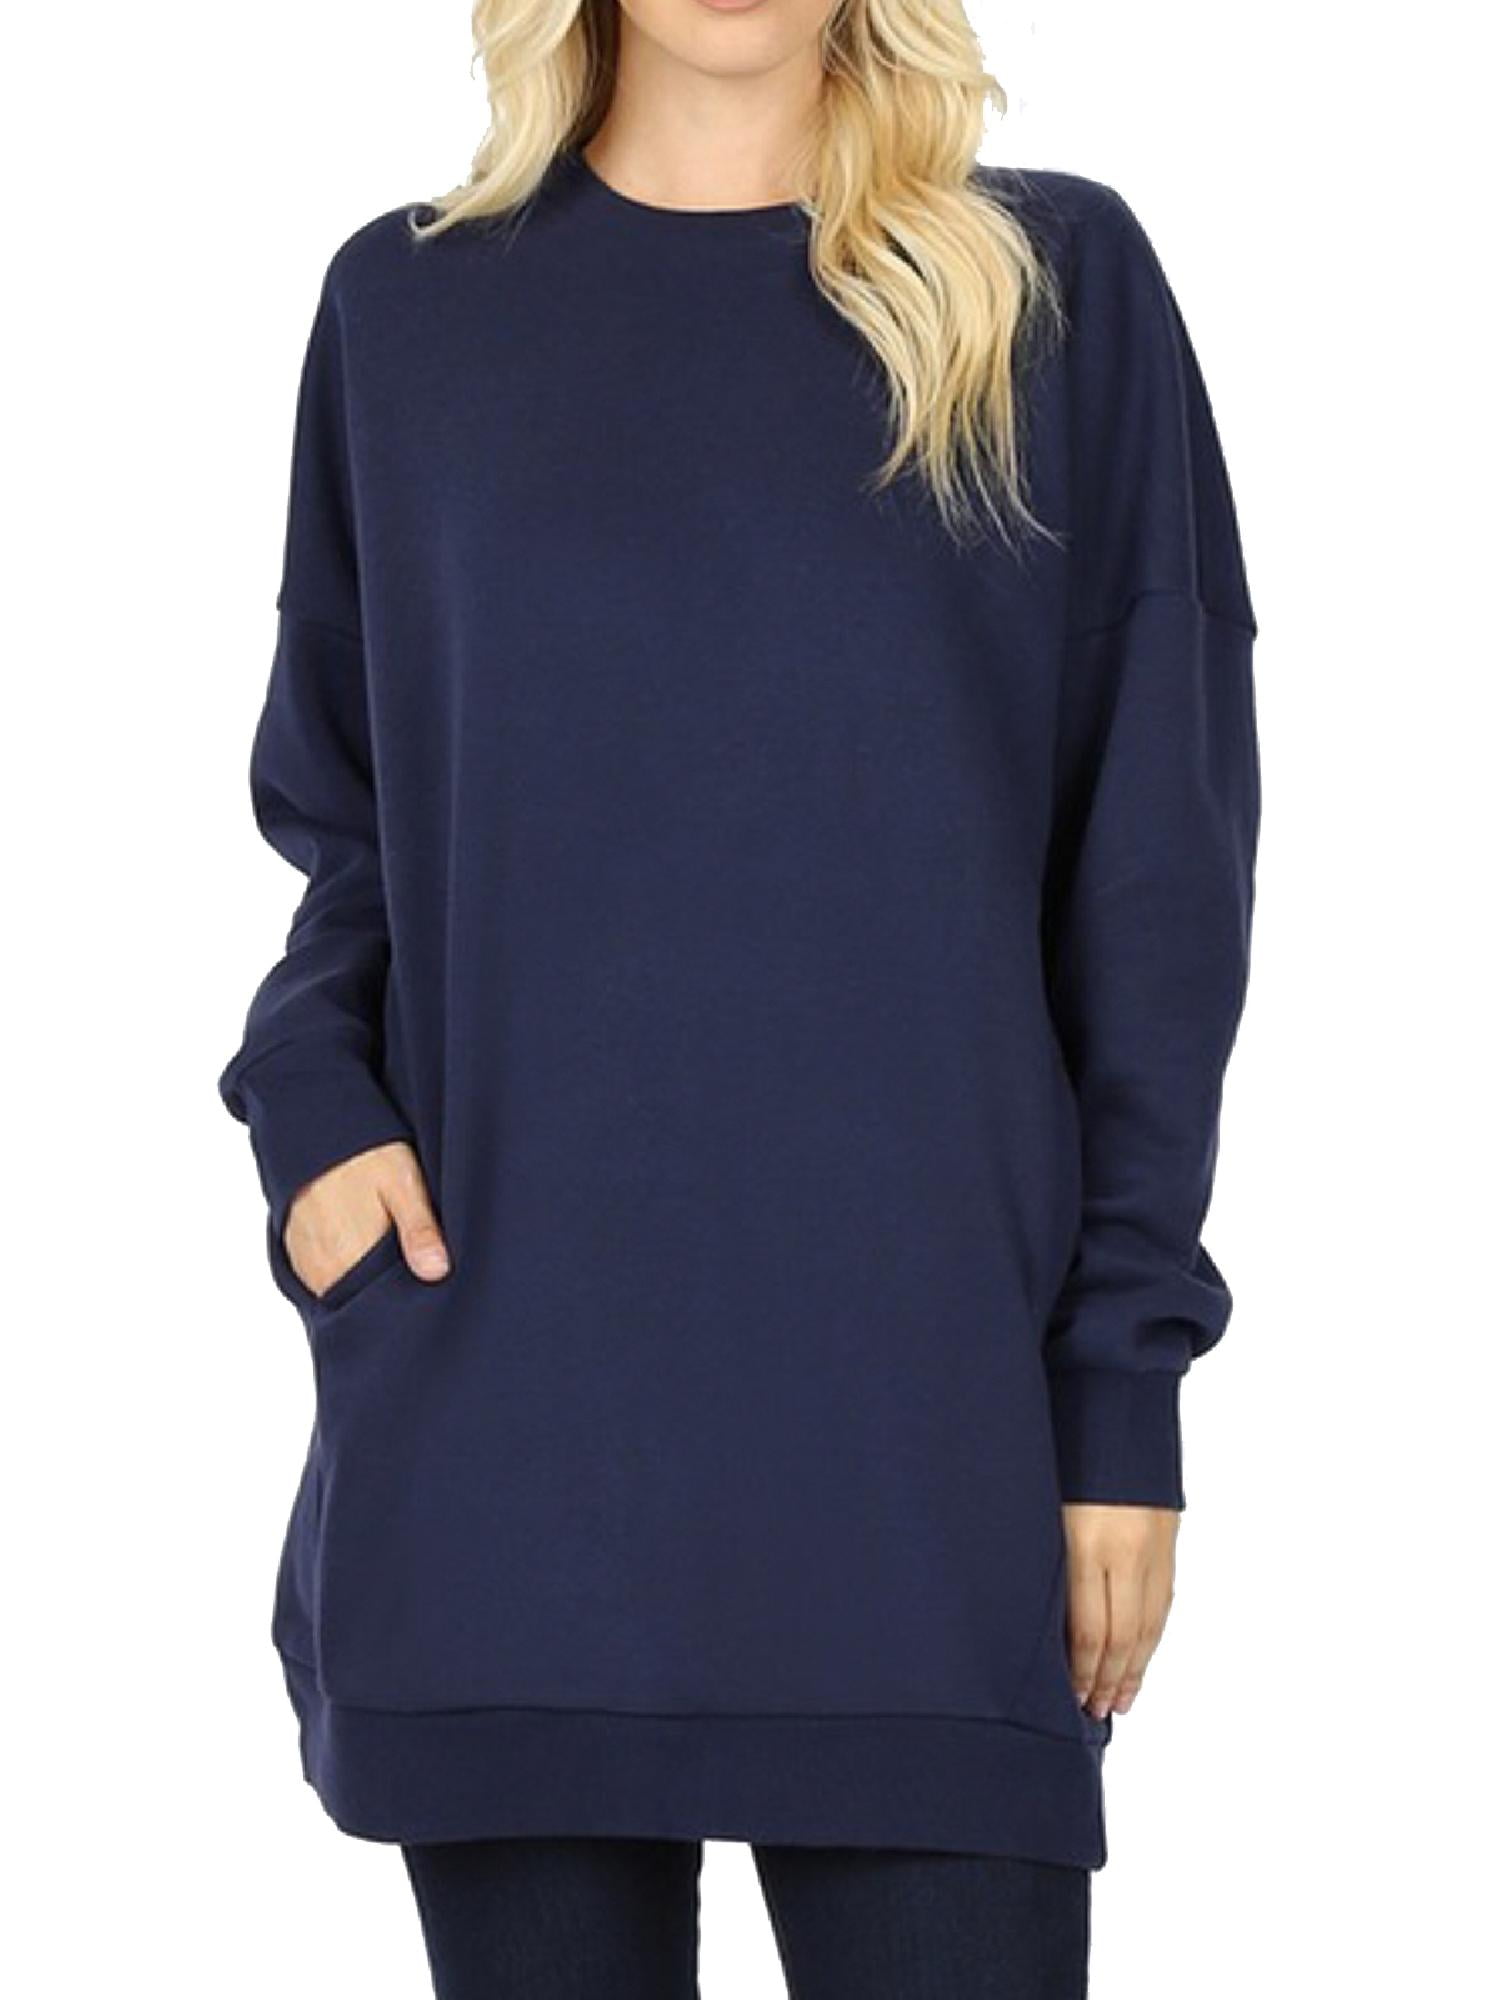 Made by Olivia - Made by Olivia Women's Casual Oversized Crew Neck ...